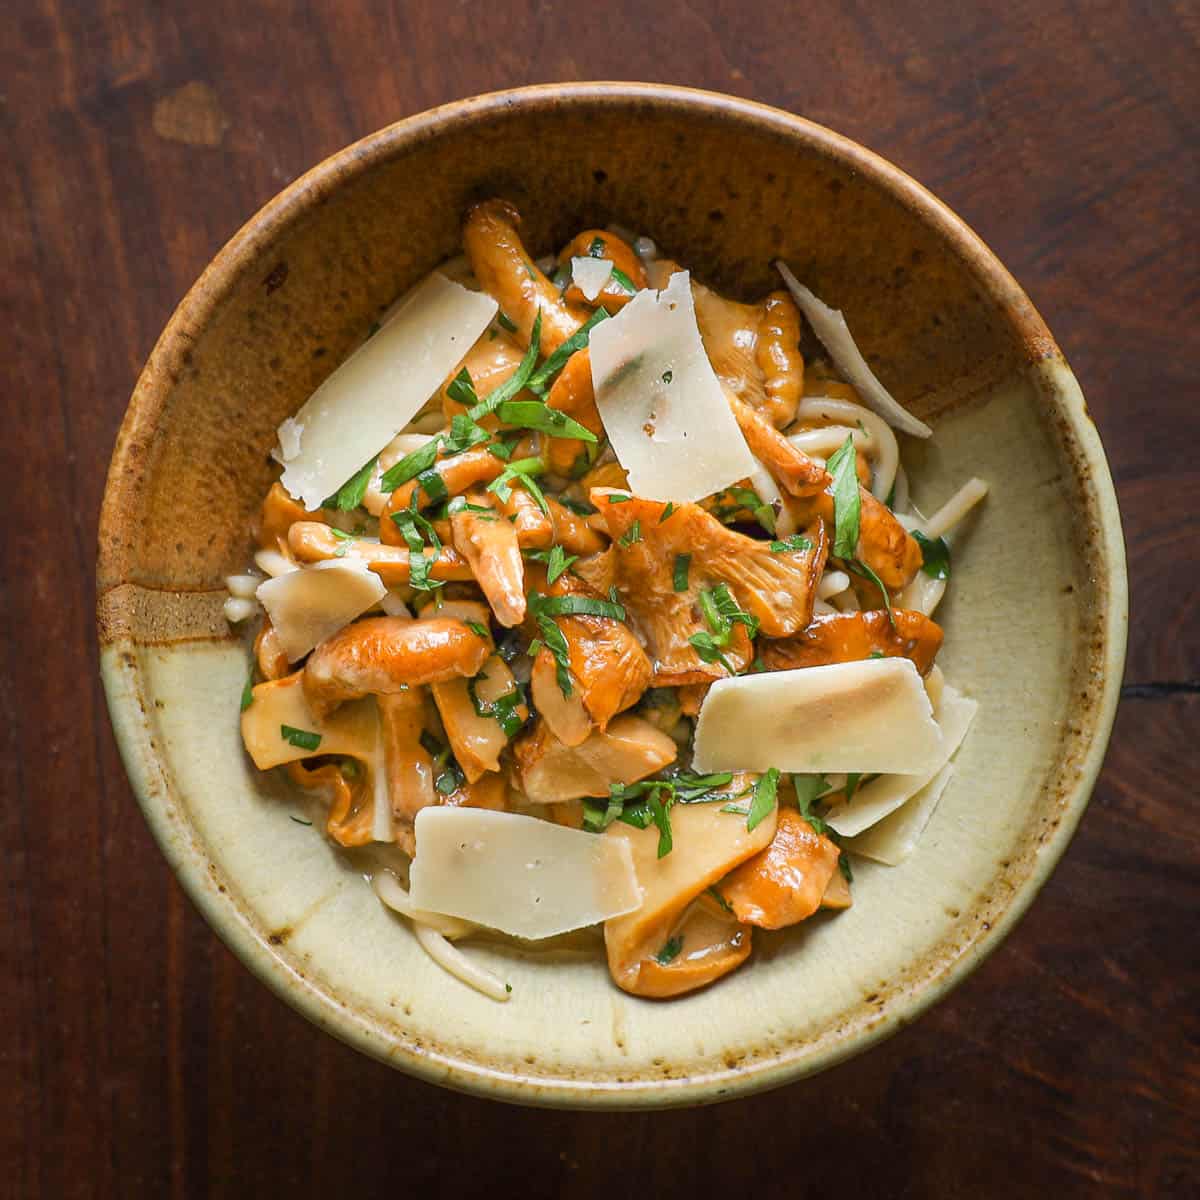 Chanterelle mushroom spaghetti with roasted garlic sauce and herbs in a ceramic bowl on black walnut background